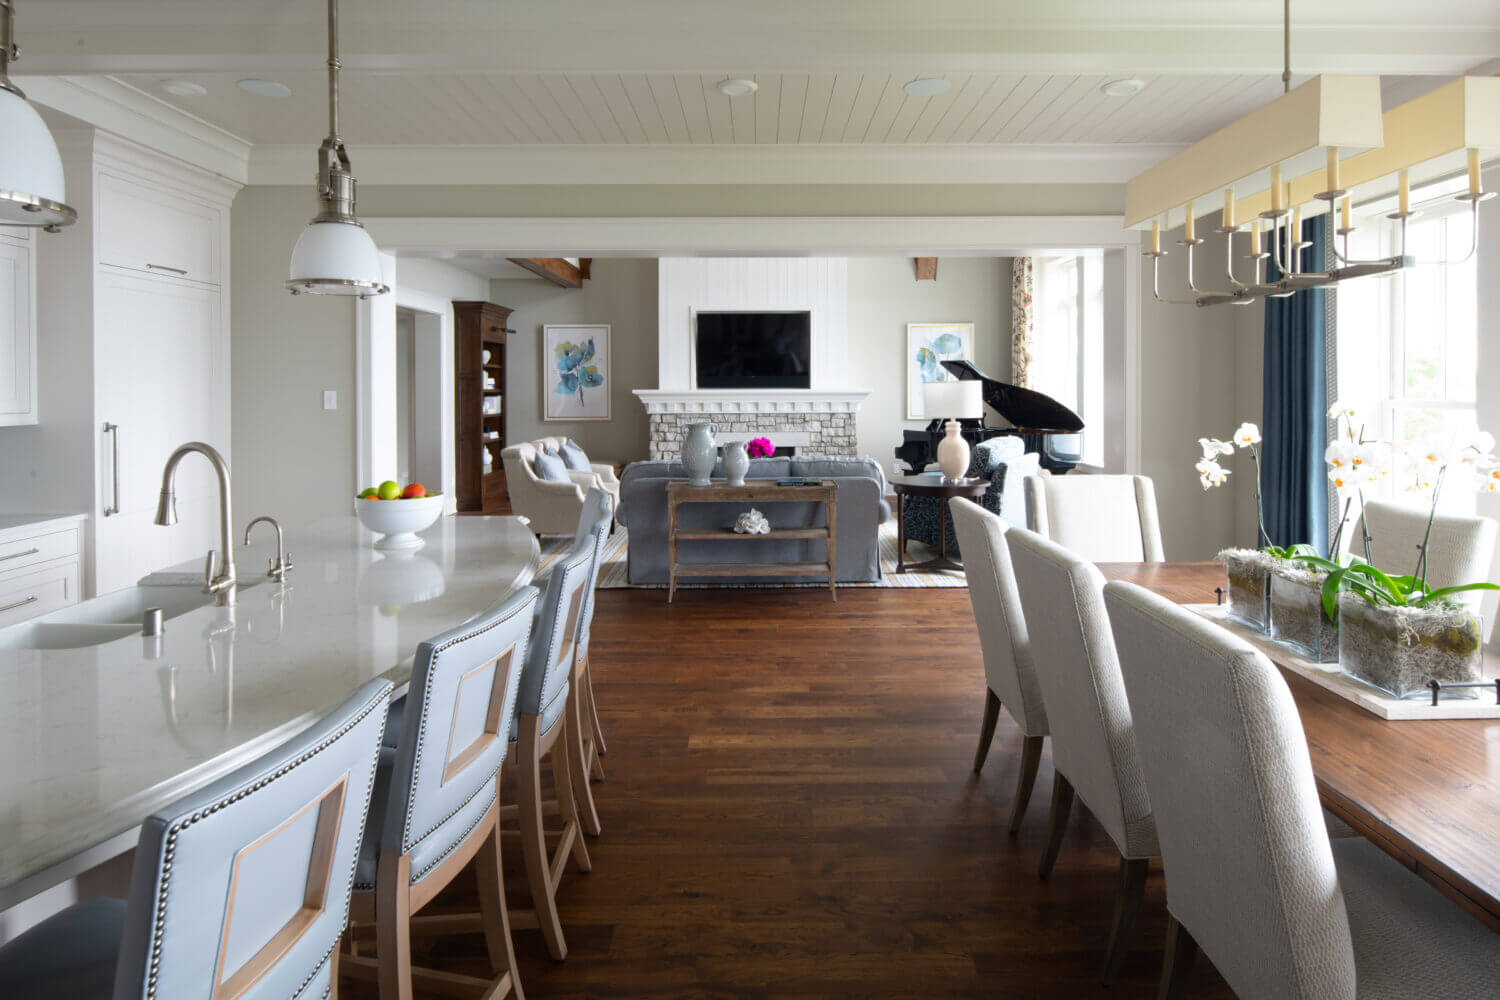 A look out to the living room from the kitchen in a East Coast Shingle styled home.